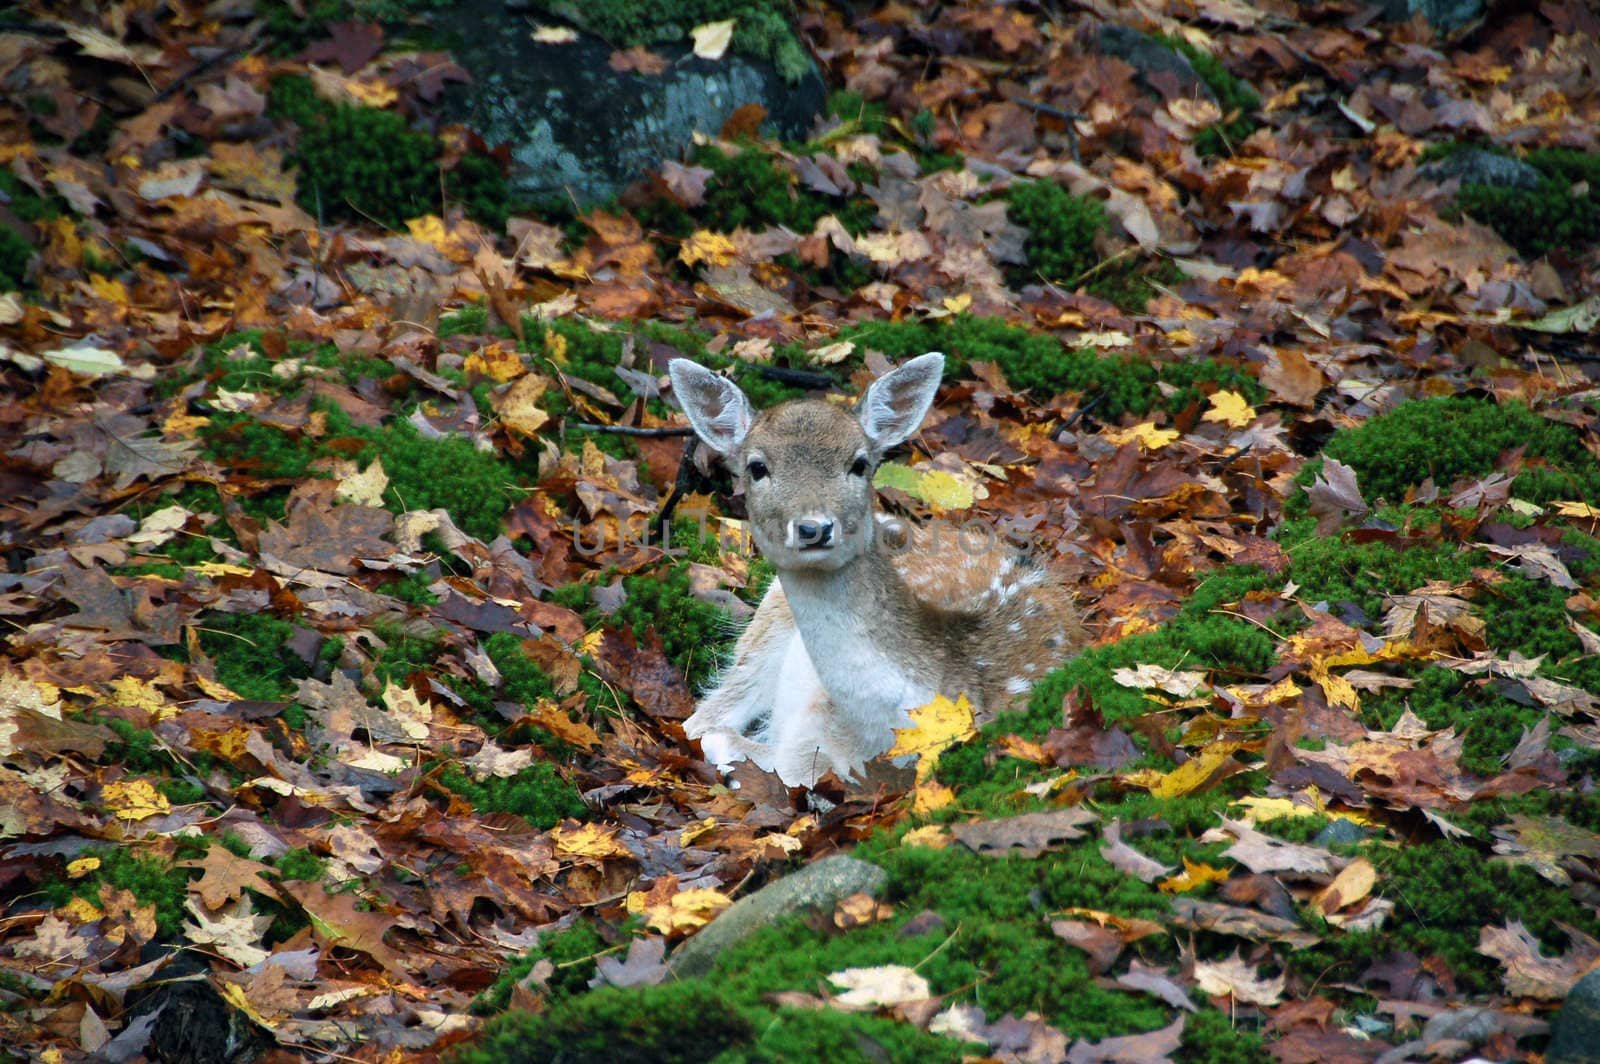 Picture of a deer in the forest in autumn